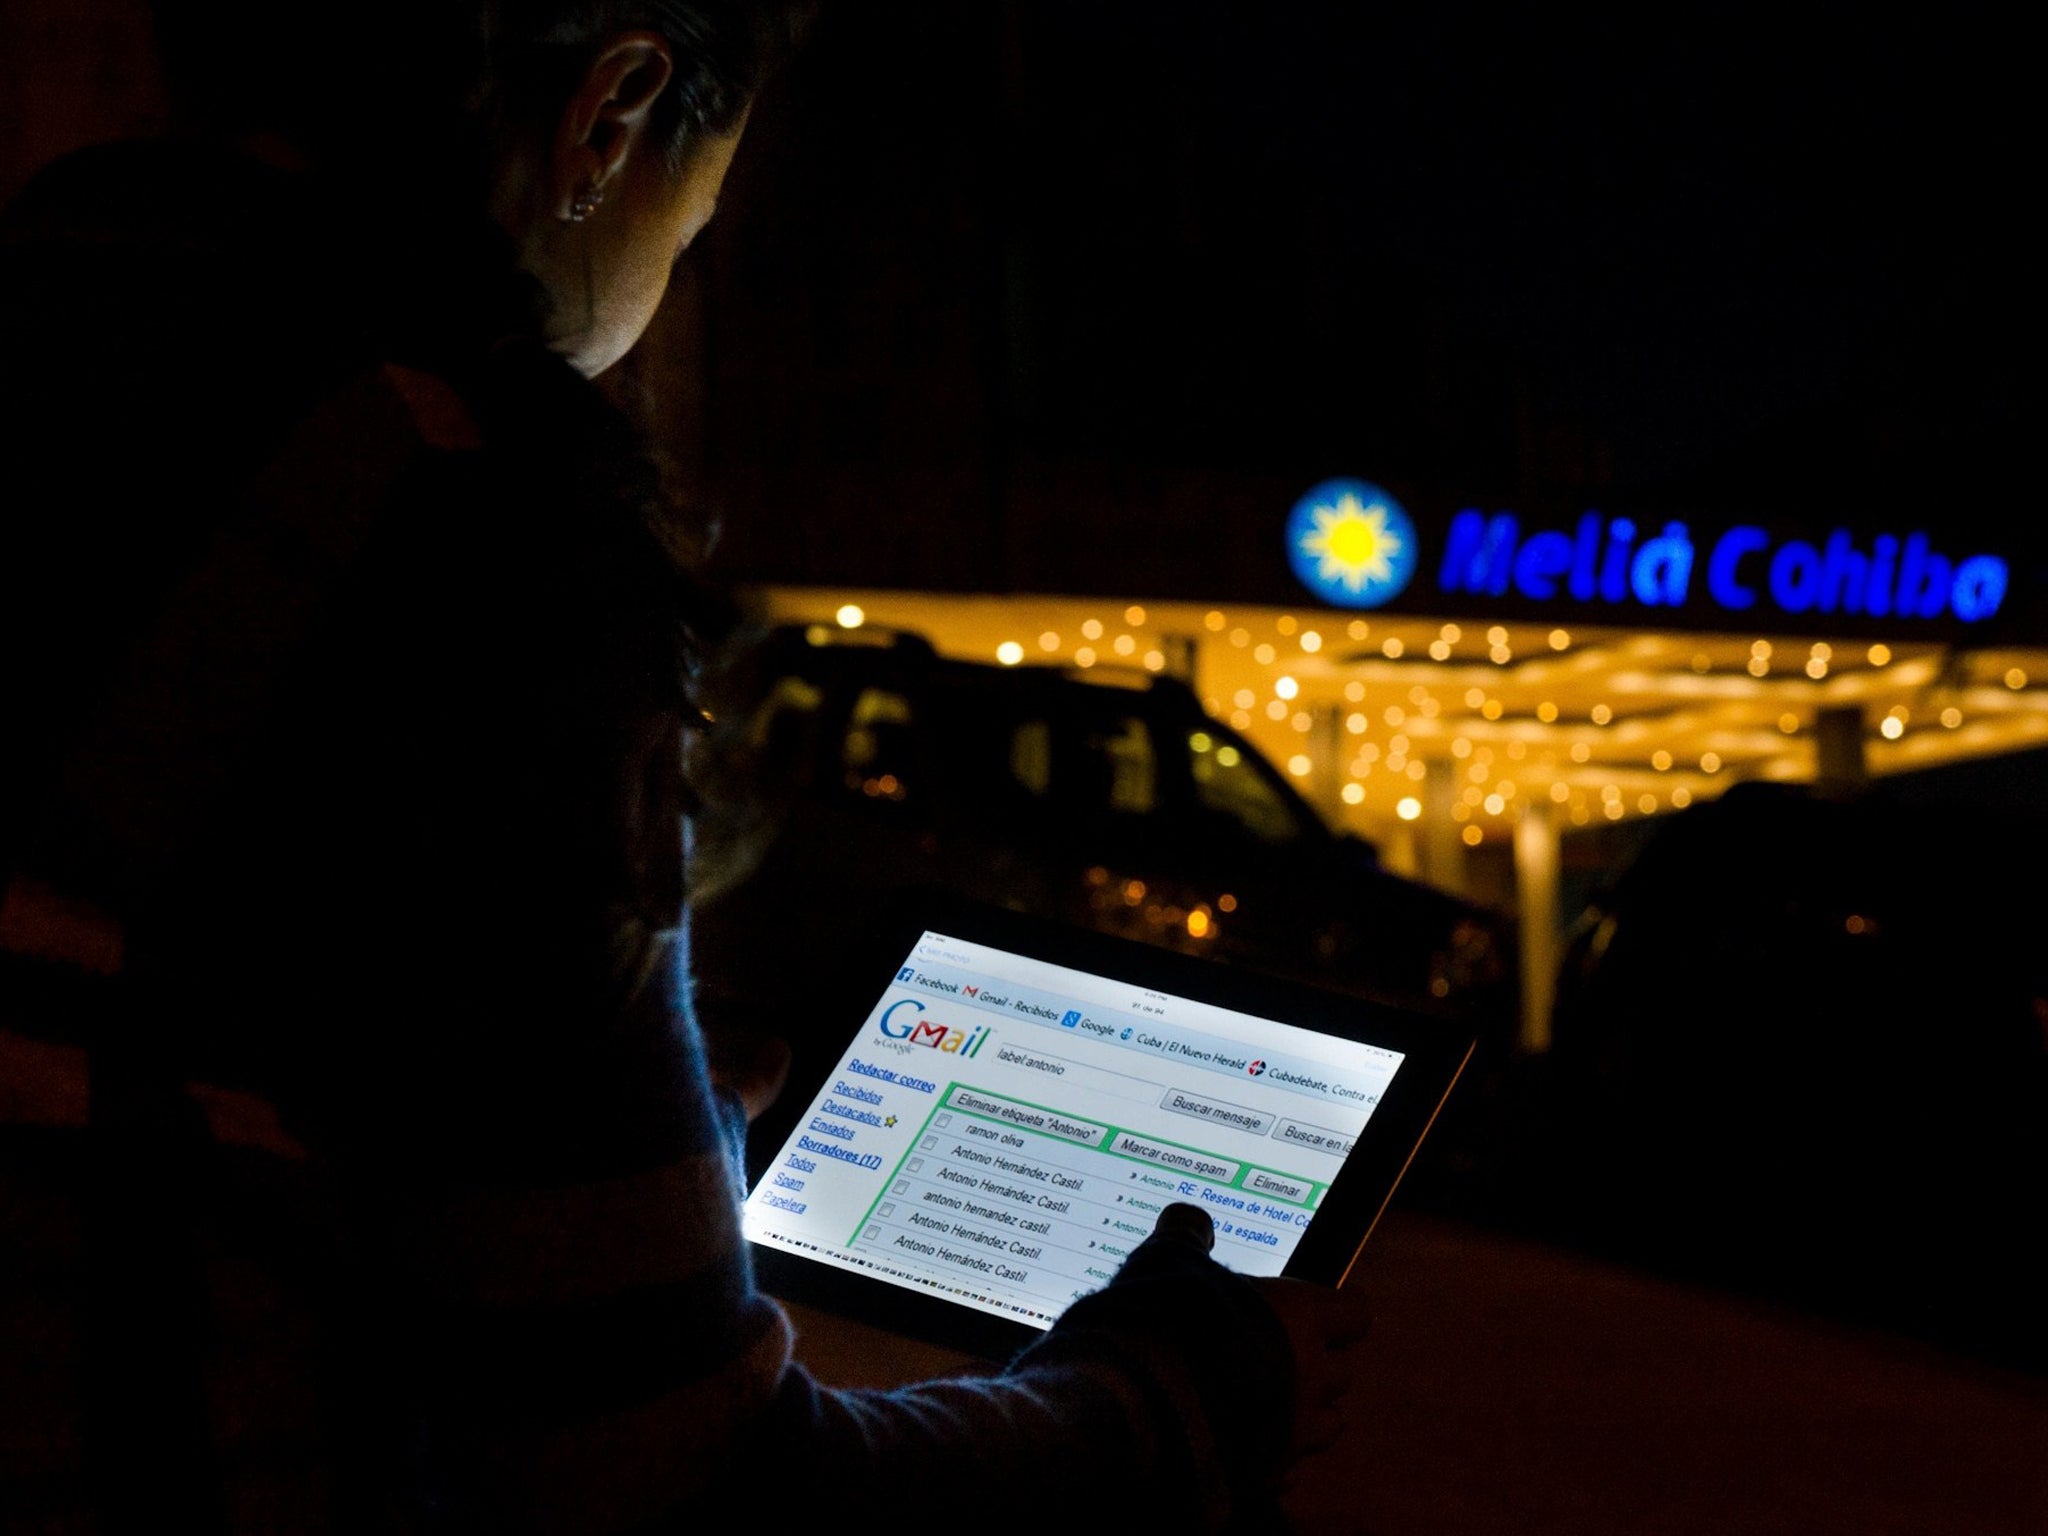 A Cuban uses an illegal wi-fi connection to surf the internet, on November 28, 2014, in Havana